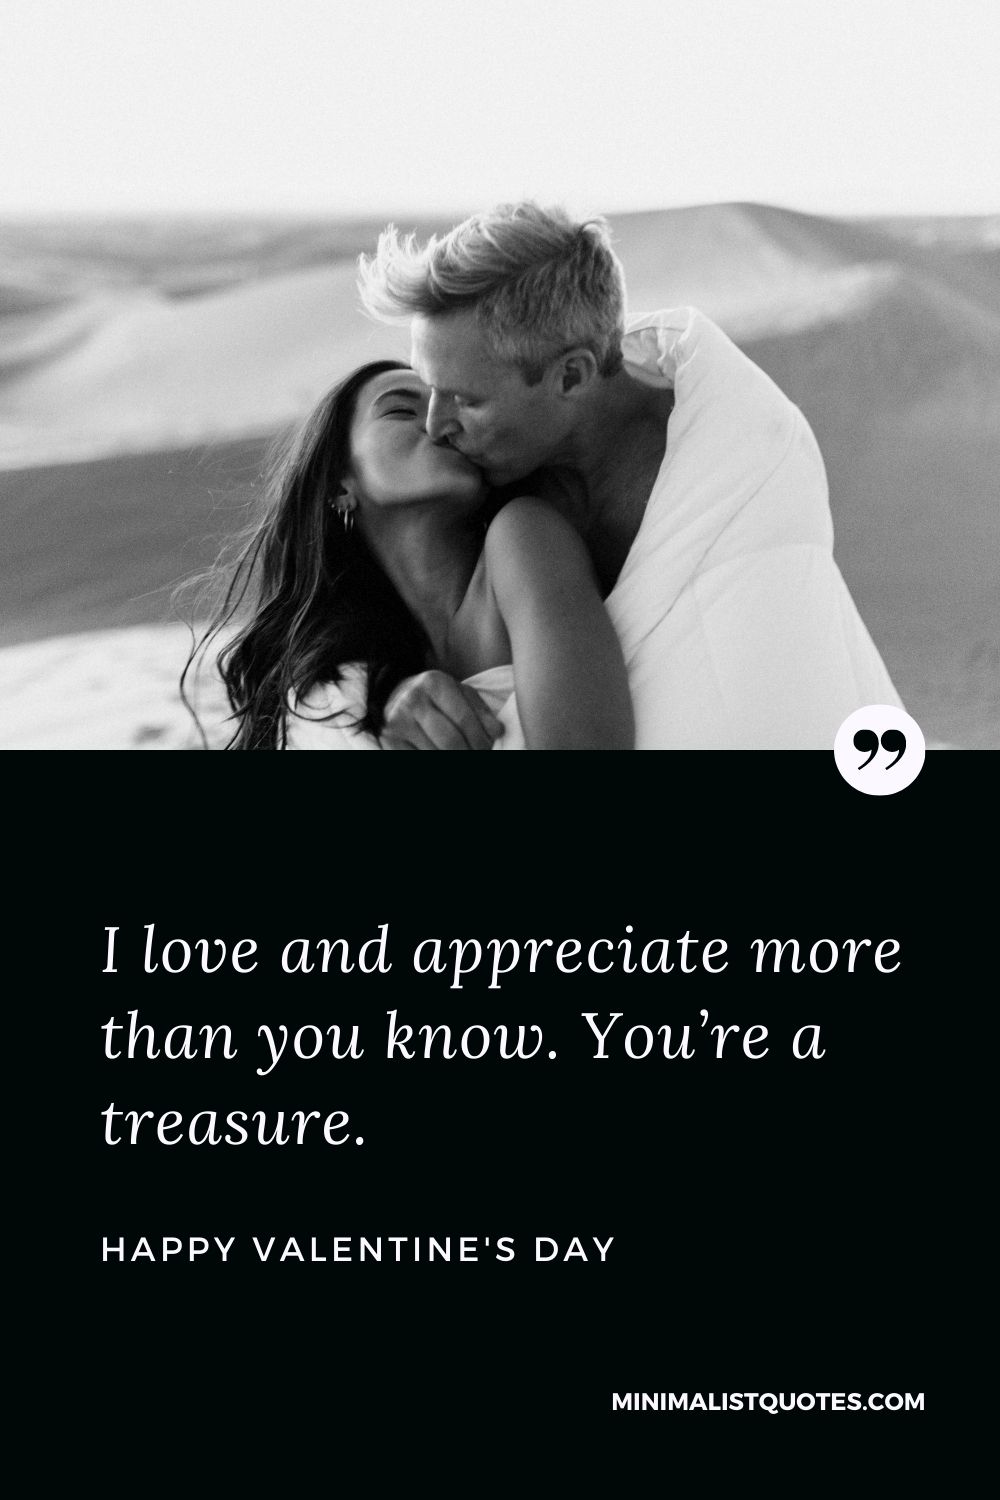 Valentine's Day wish, quote & message with image: I love and appreciate more than you know. You’re a treasure. Happy Valentine's Day!